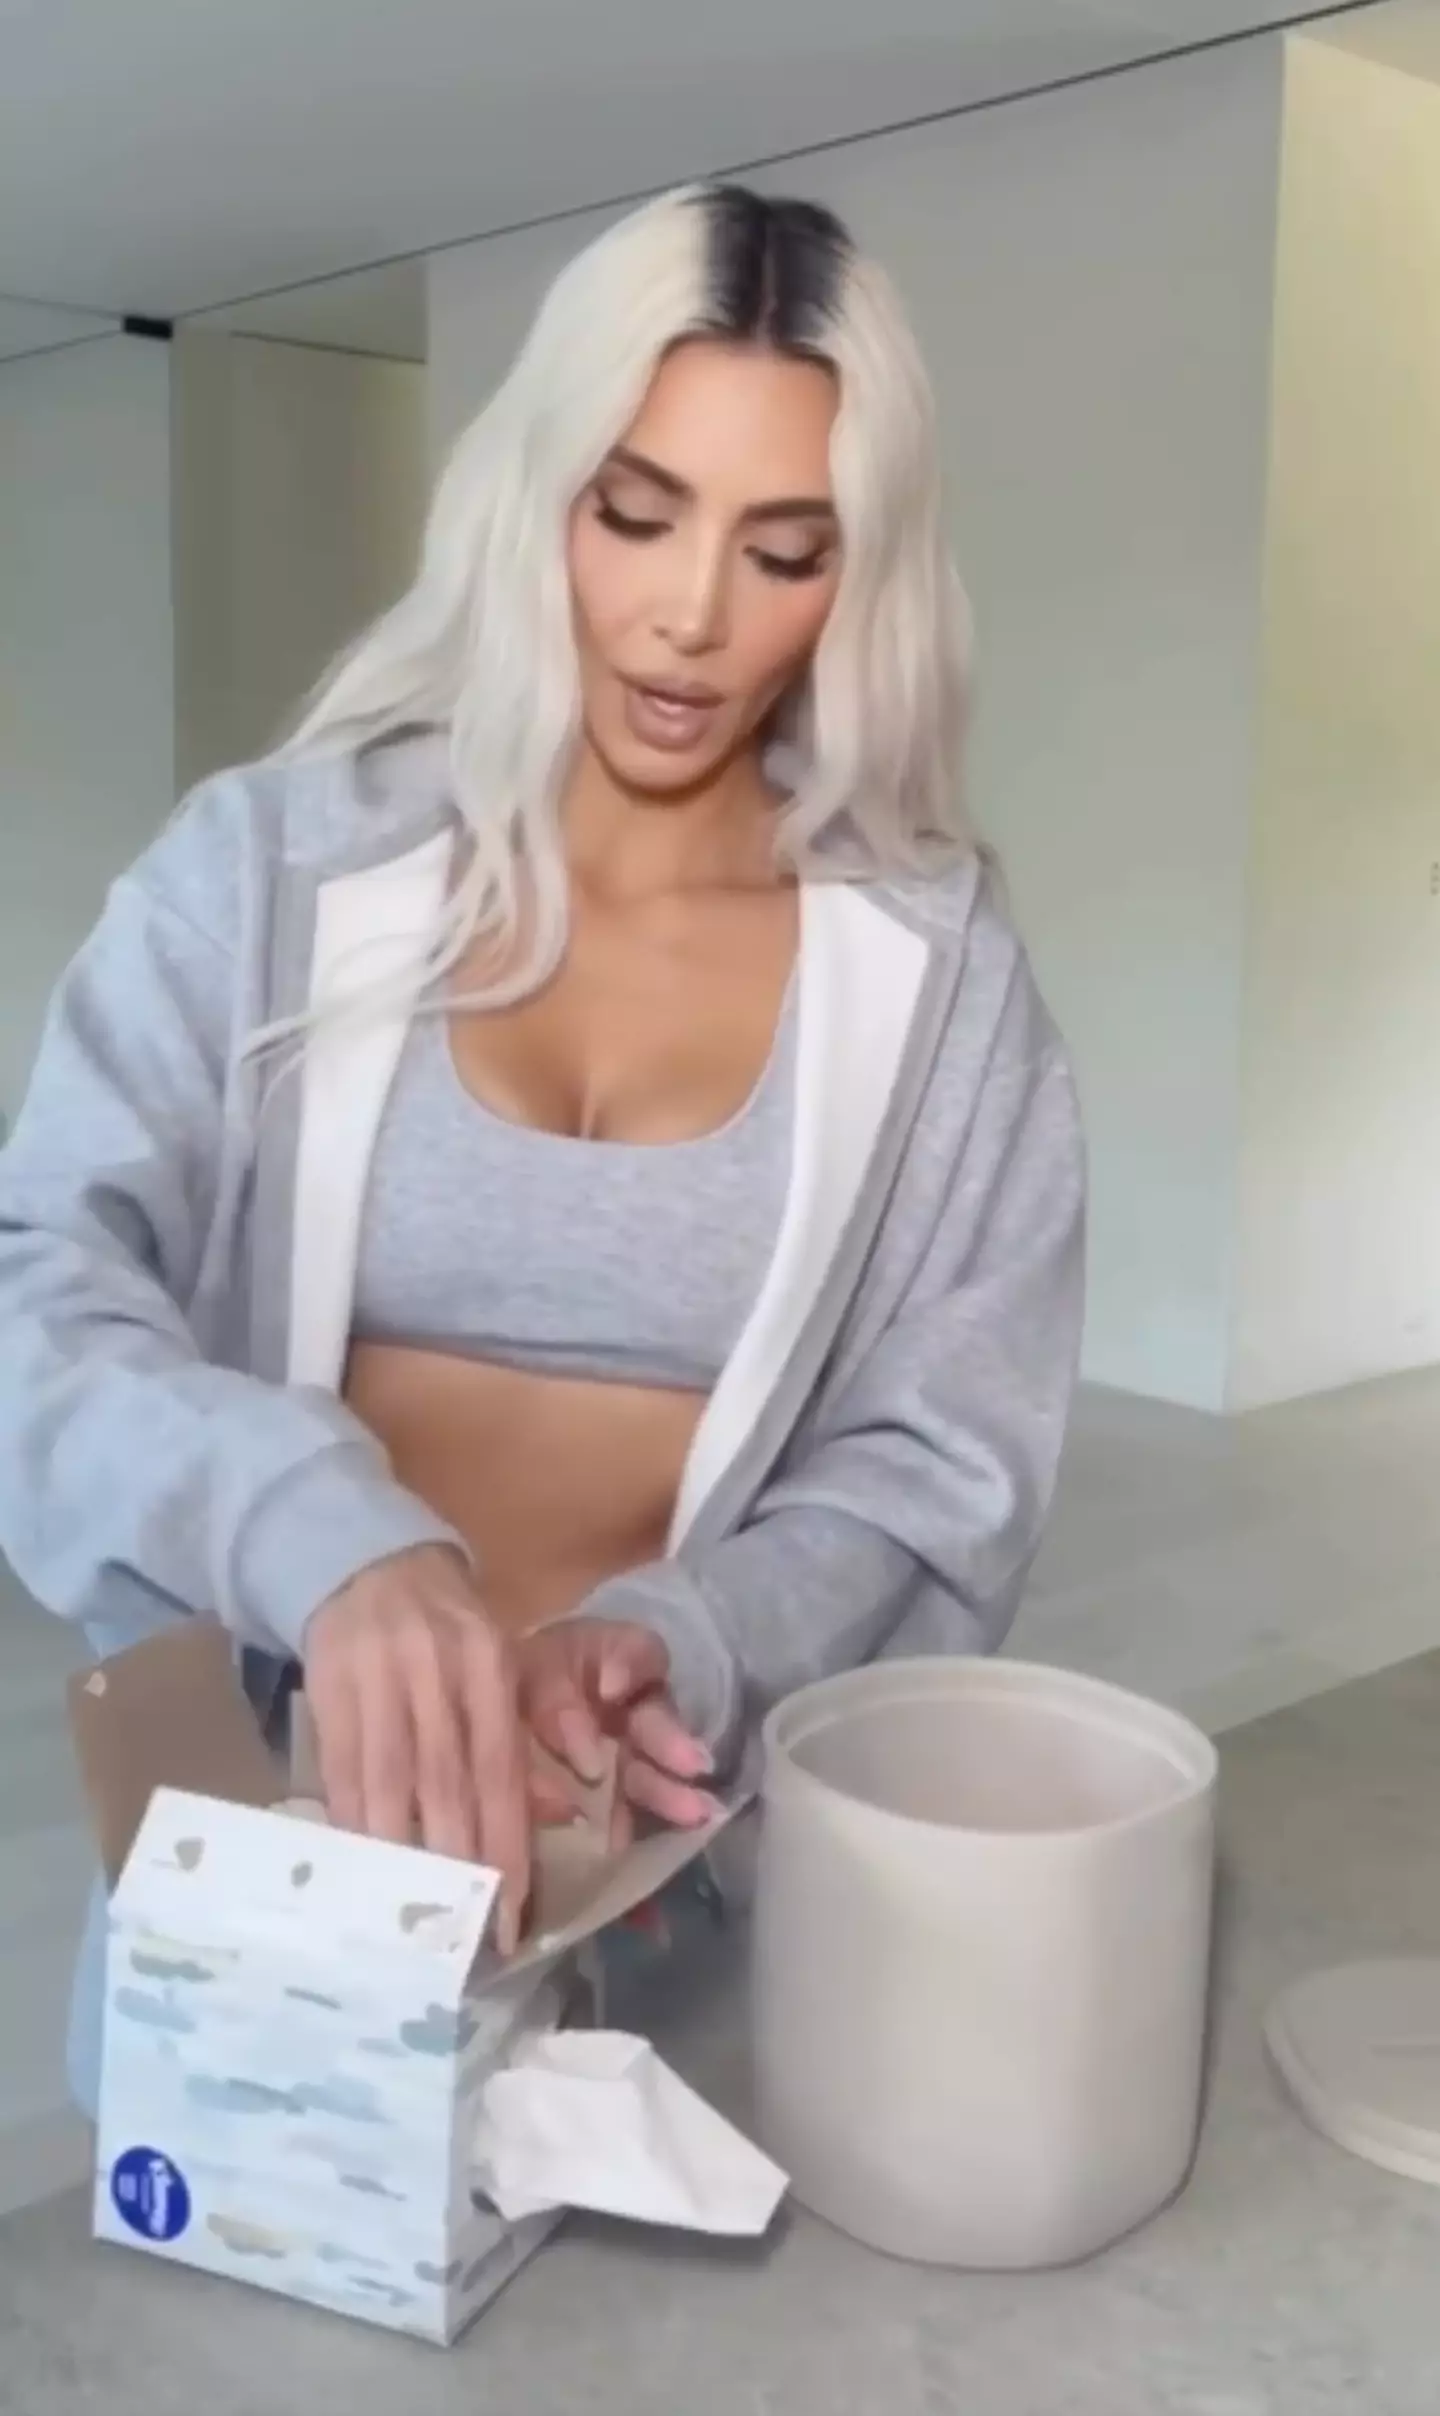 Kim baffled fans after she gave a demonstration on how to put tissues into a tissue holder.